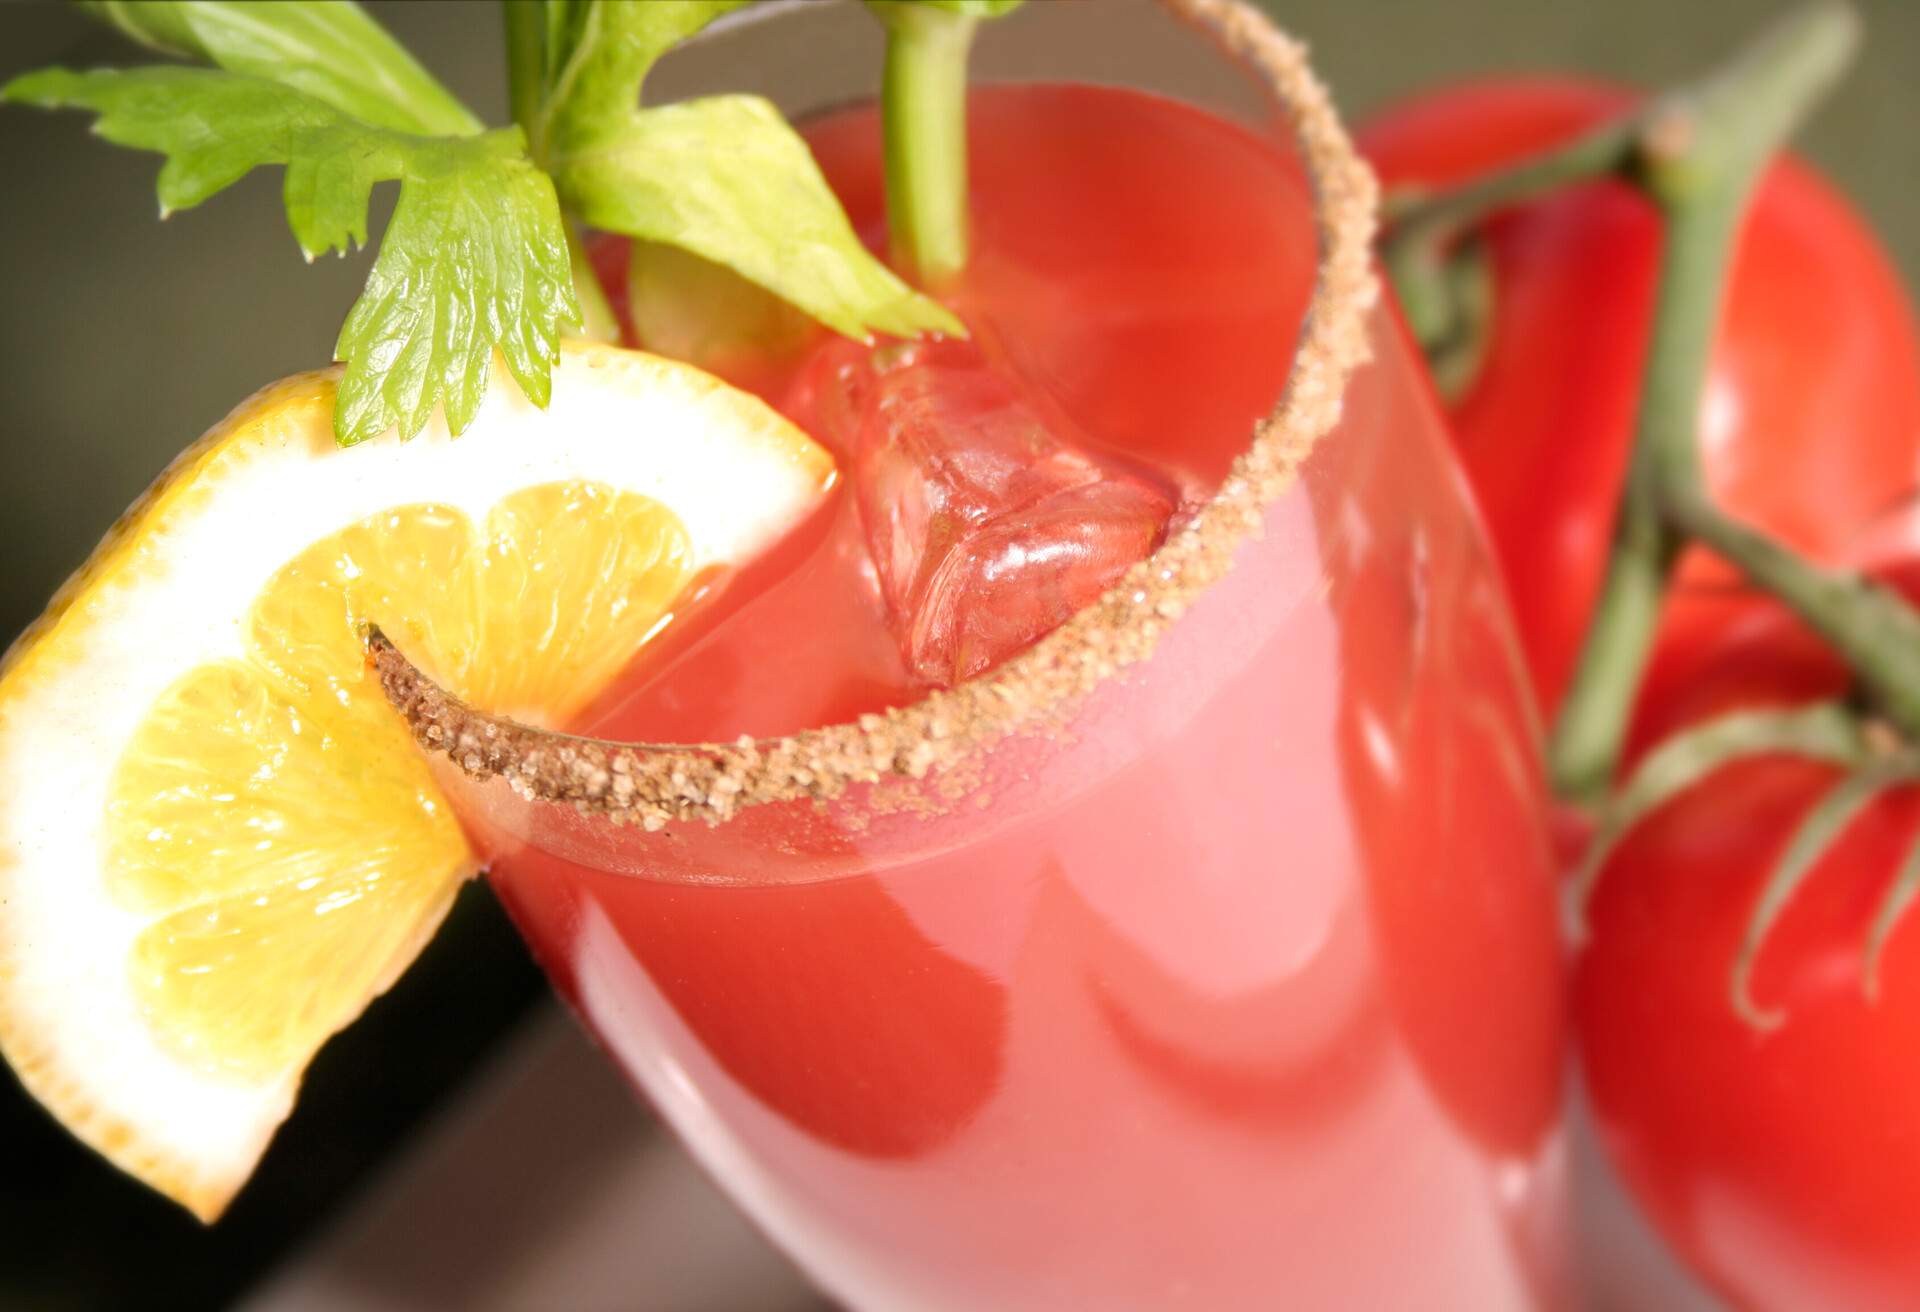 A delicious Tomato Juice Coktail (Bloody Caesar or Bloody Mary), served with a slice of lemon and a branch of celery, with ice cubes.